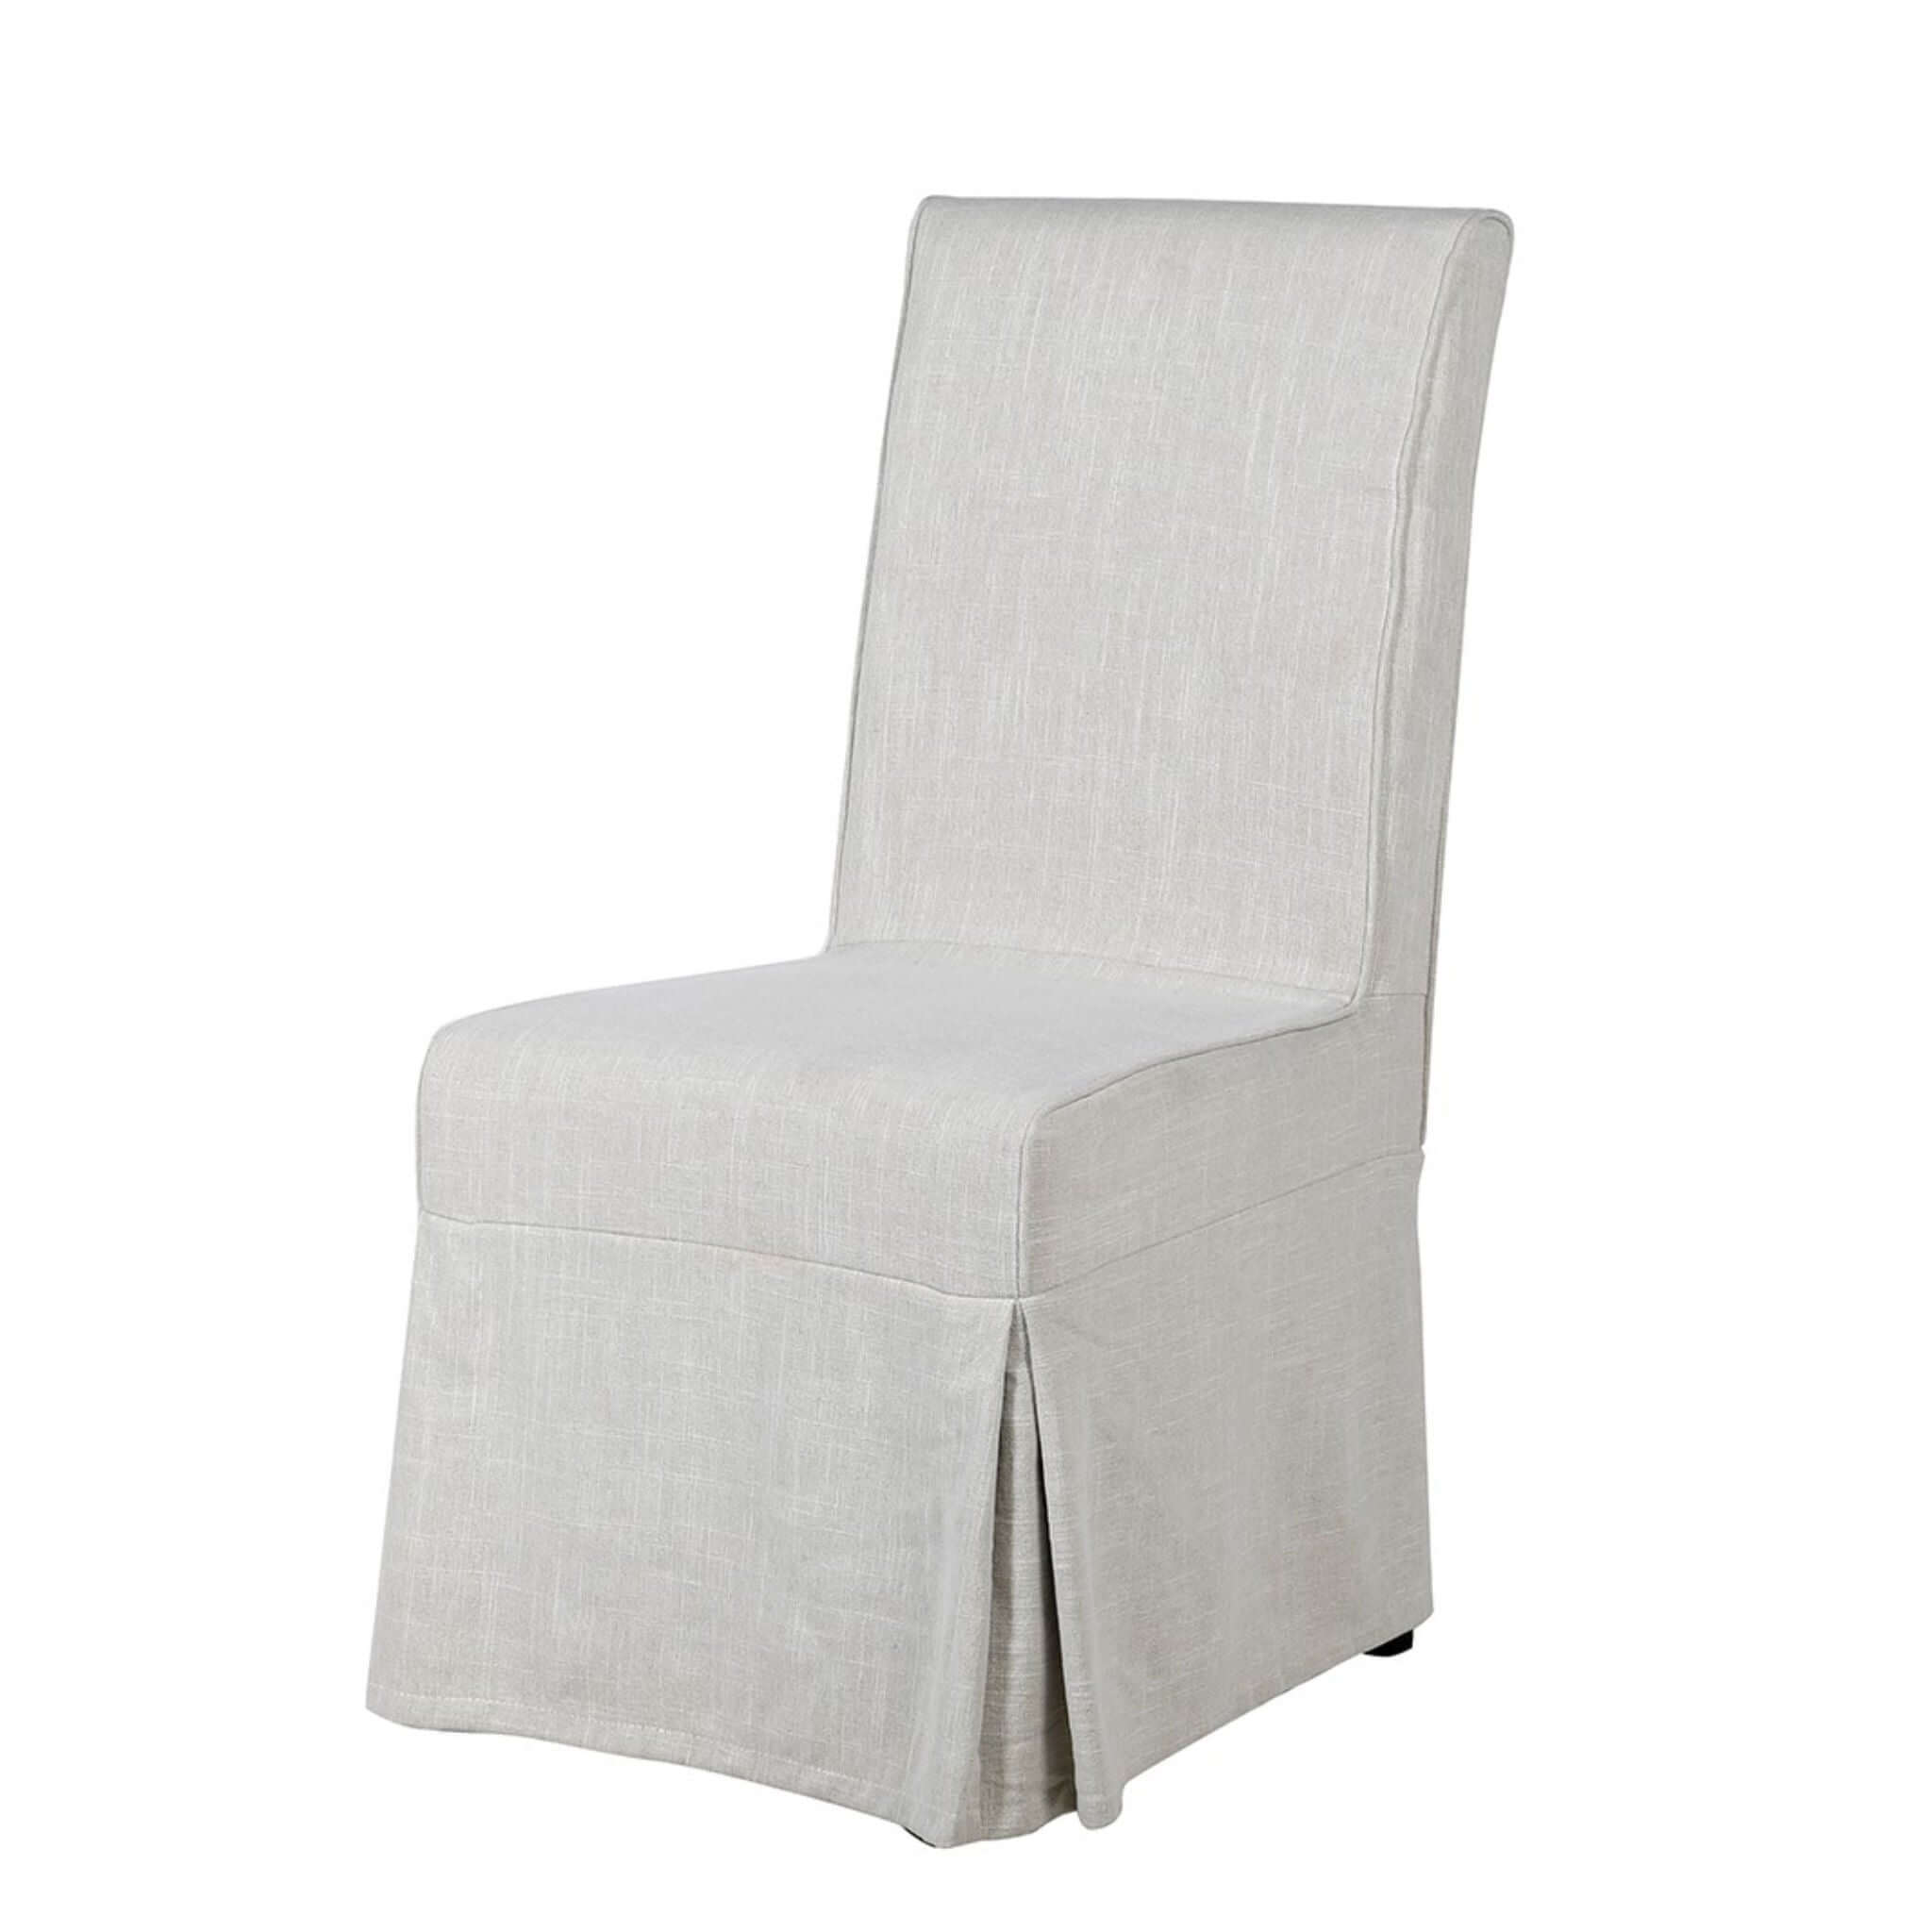 Yealm Loose Cover Dining Chair - Ivory - escapologyhome.co.uk